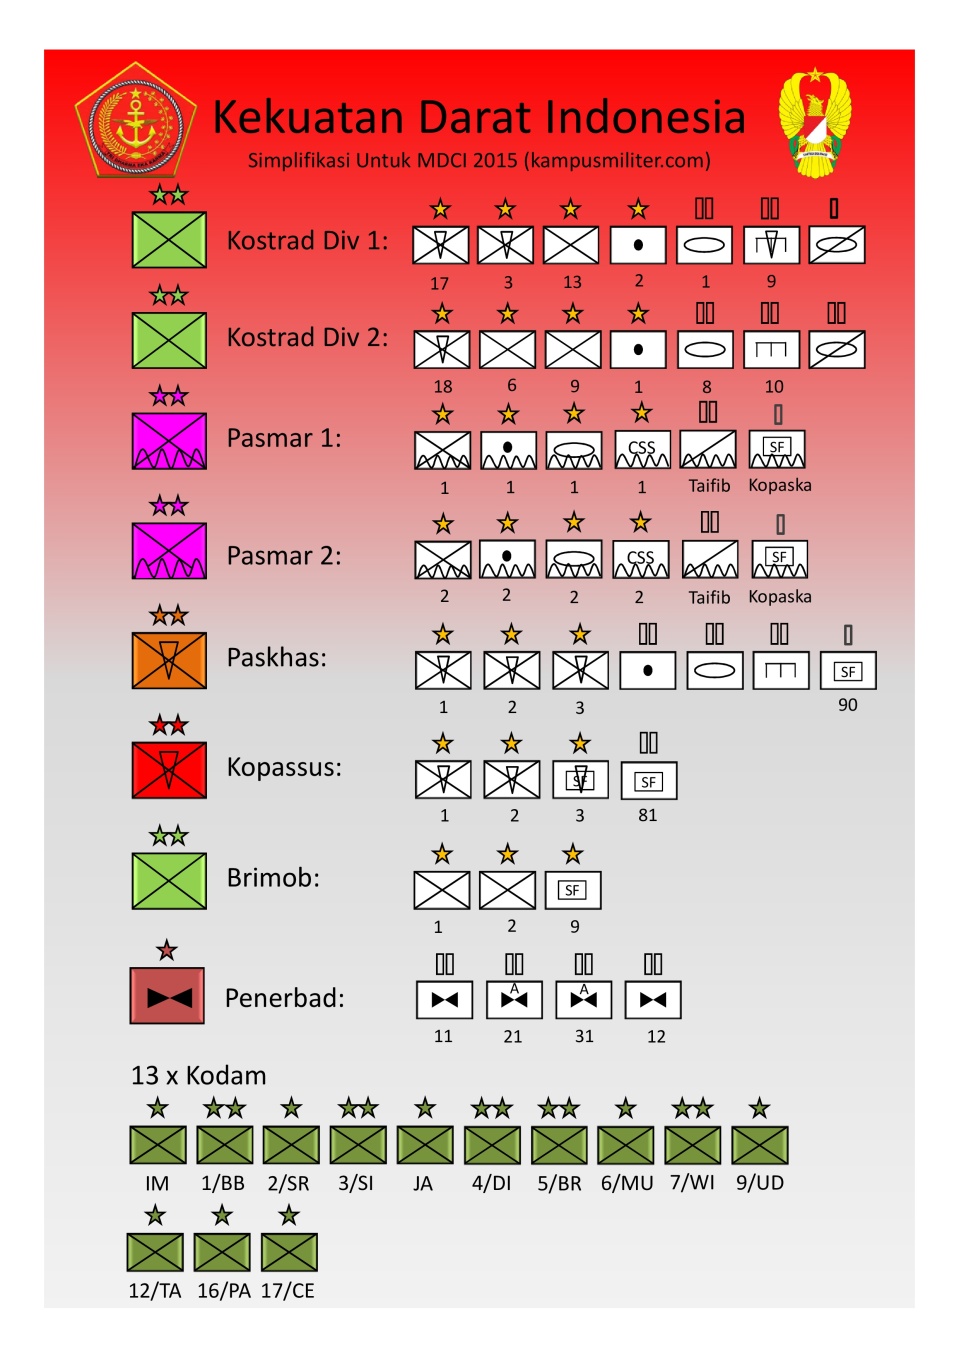 Indonesian Ground Forces Order of Battle, simplified for MDCI 2015